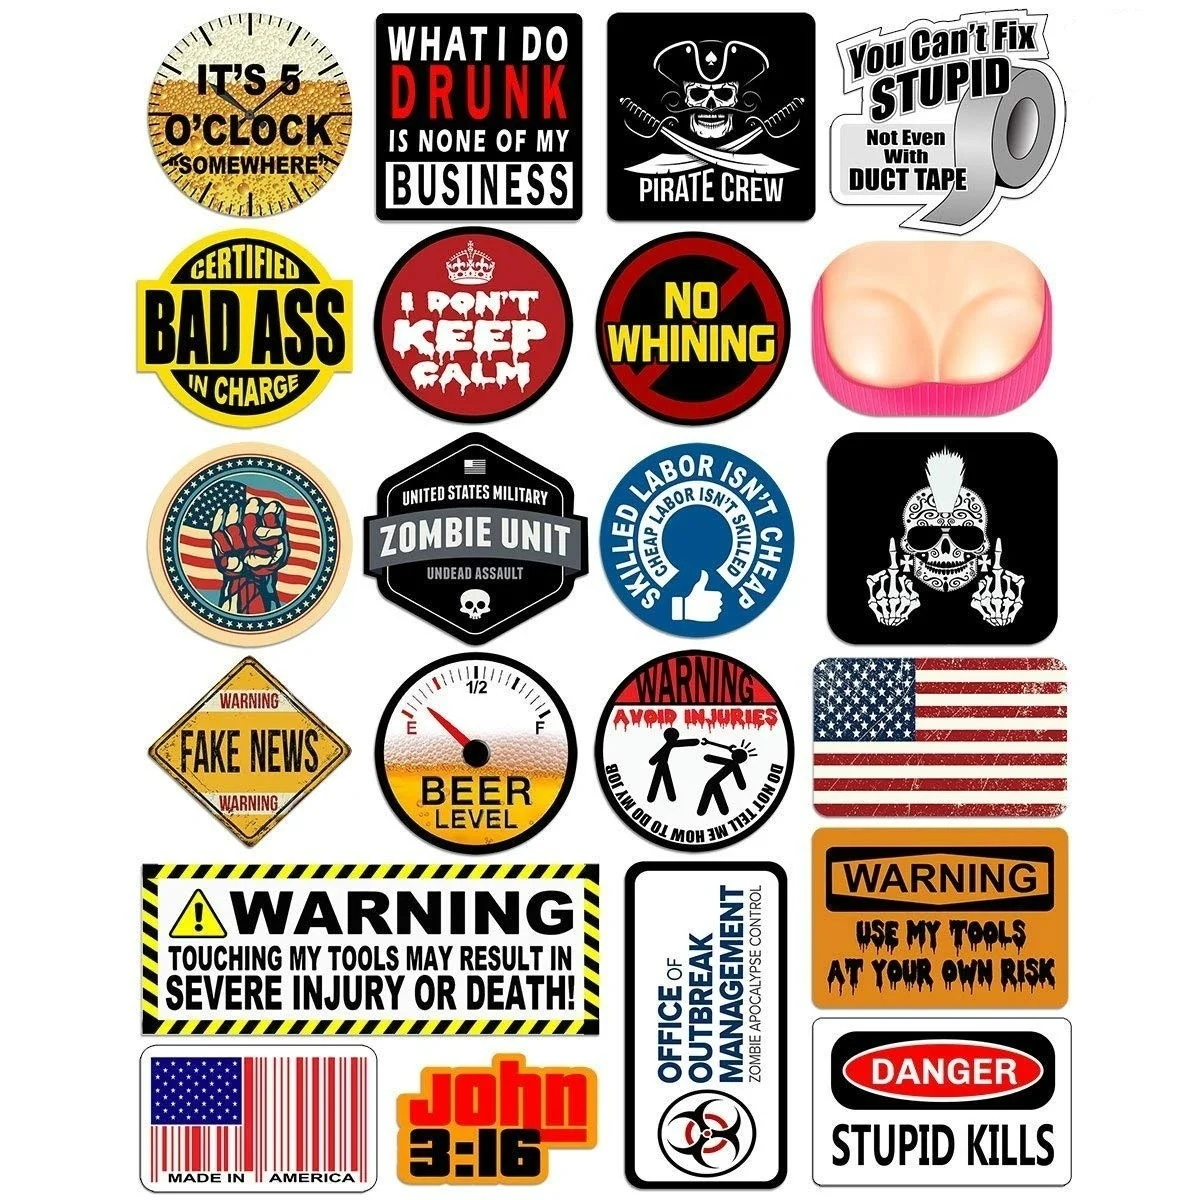 Realtor Certified Bad Ass Hard Hat Decals Funny Helmet Stickers 2 PACK